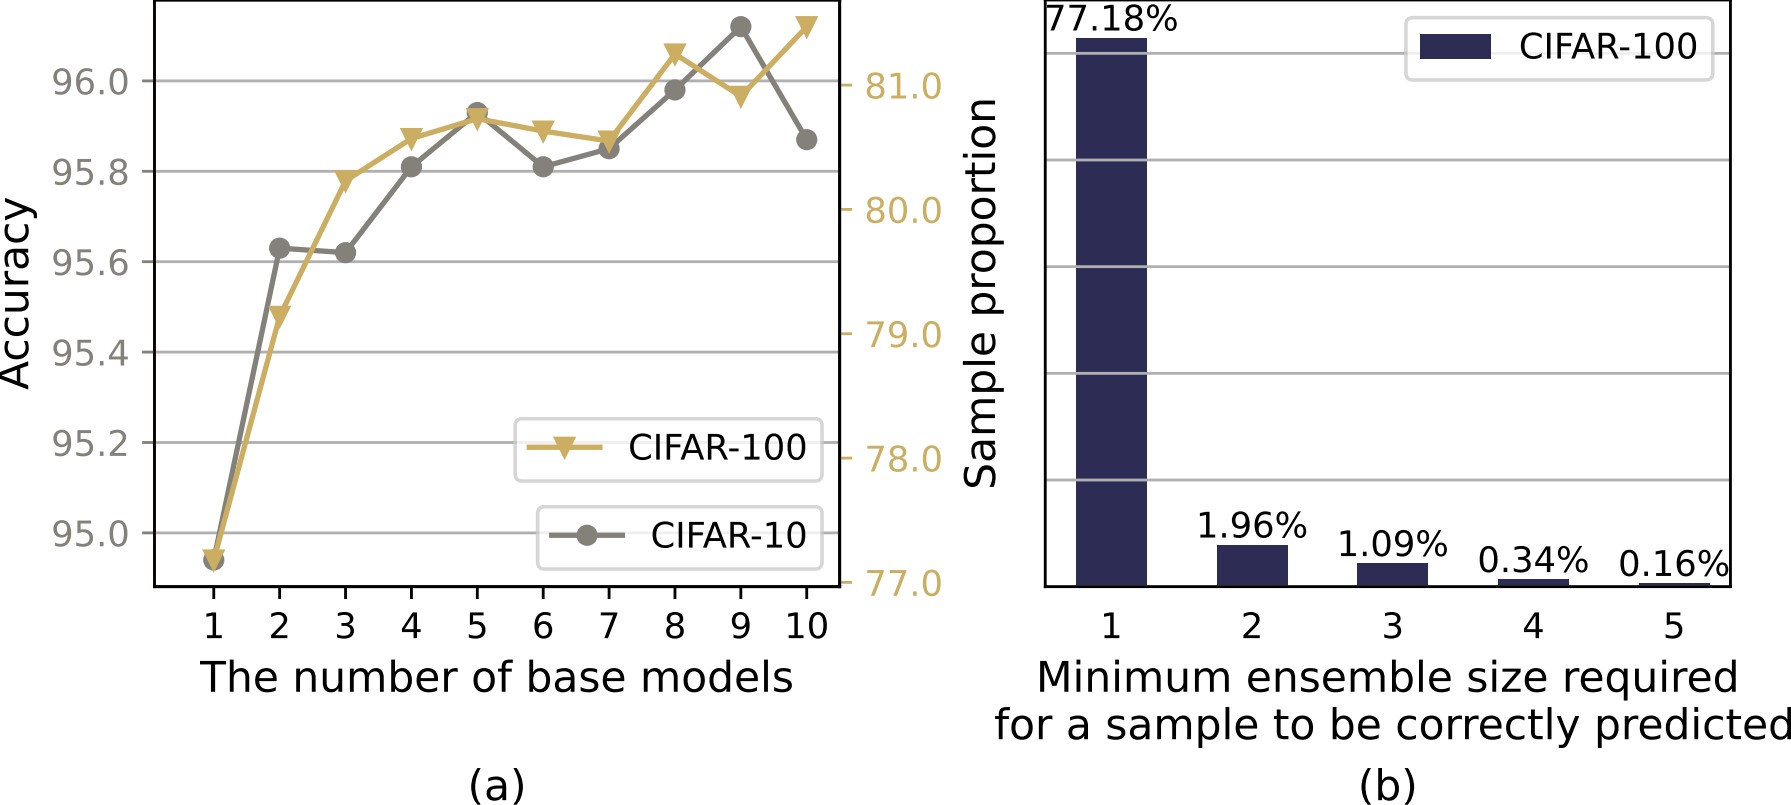 (a) The performance of the average ensemble method on CIFAR-10/100 with the different number of base models. (b) The minimum size of the average ensemble for correctly predicting samples in the CIFAR-100 dataset.